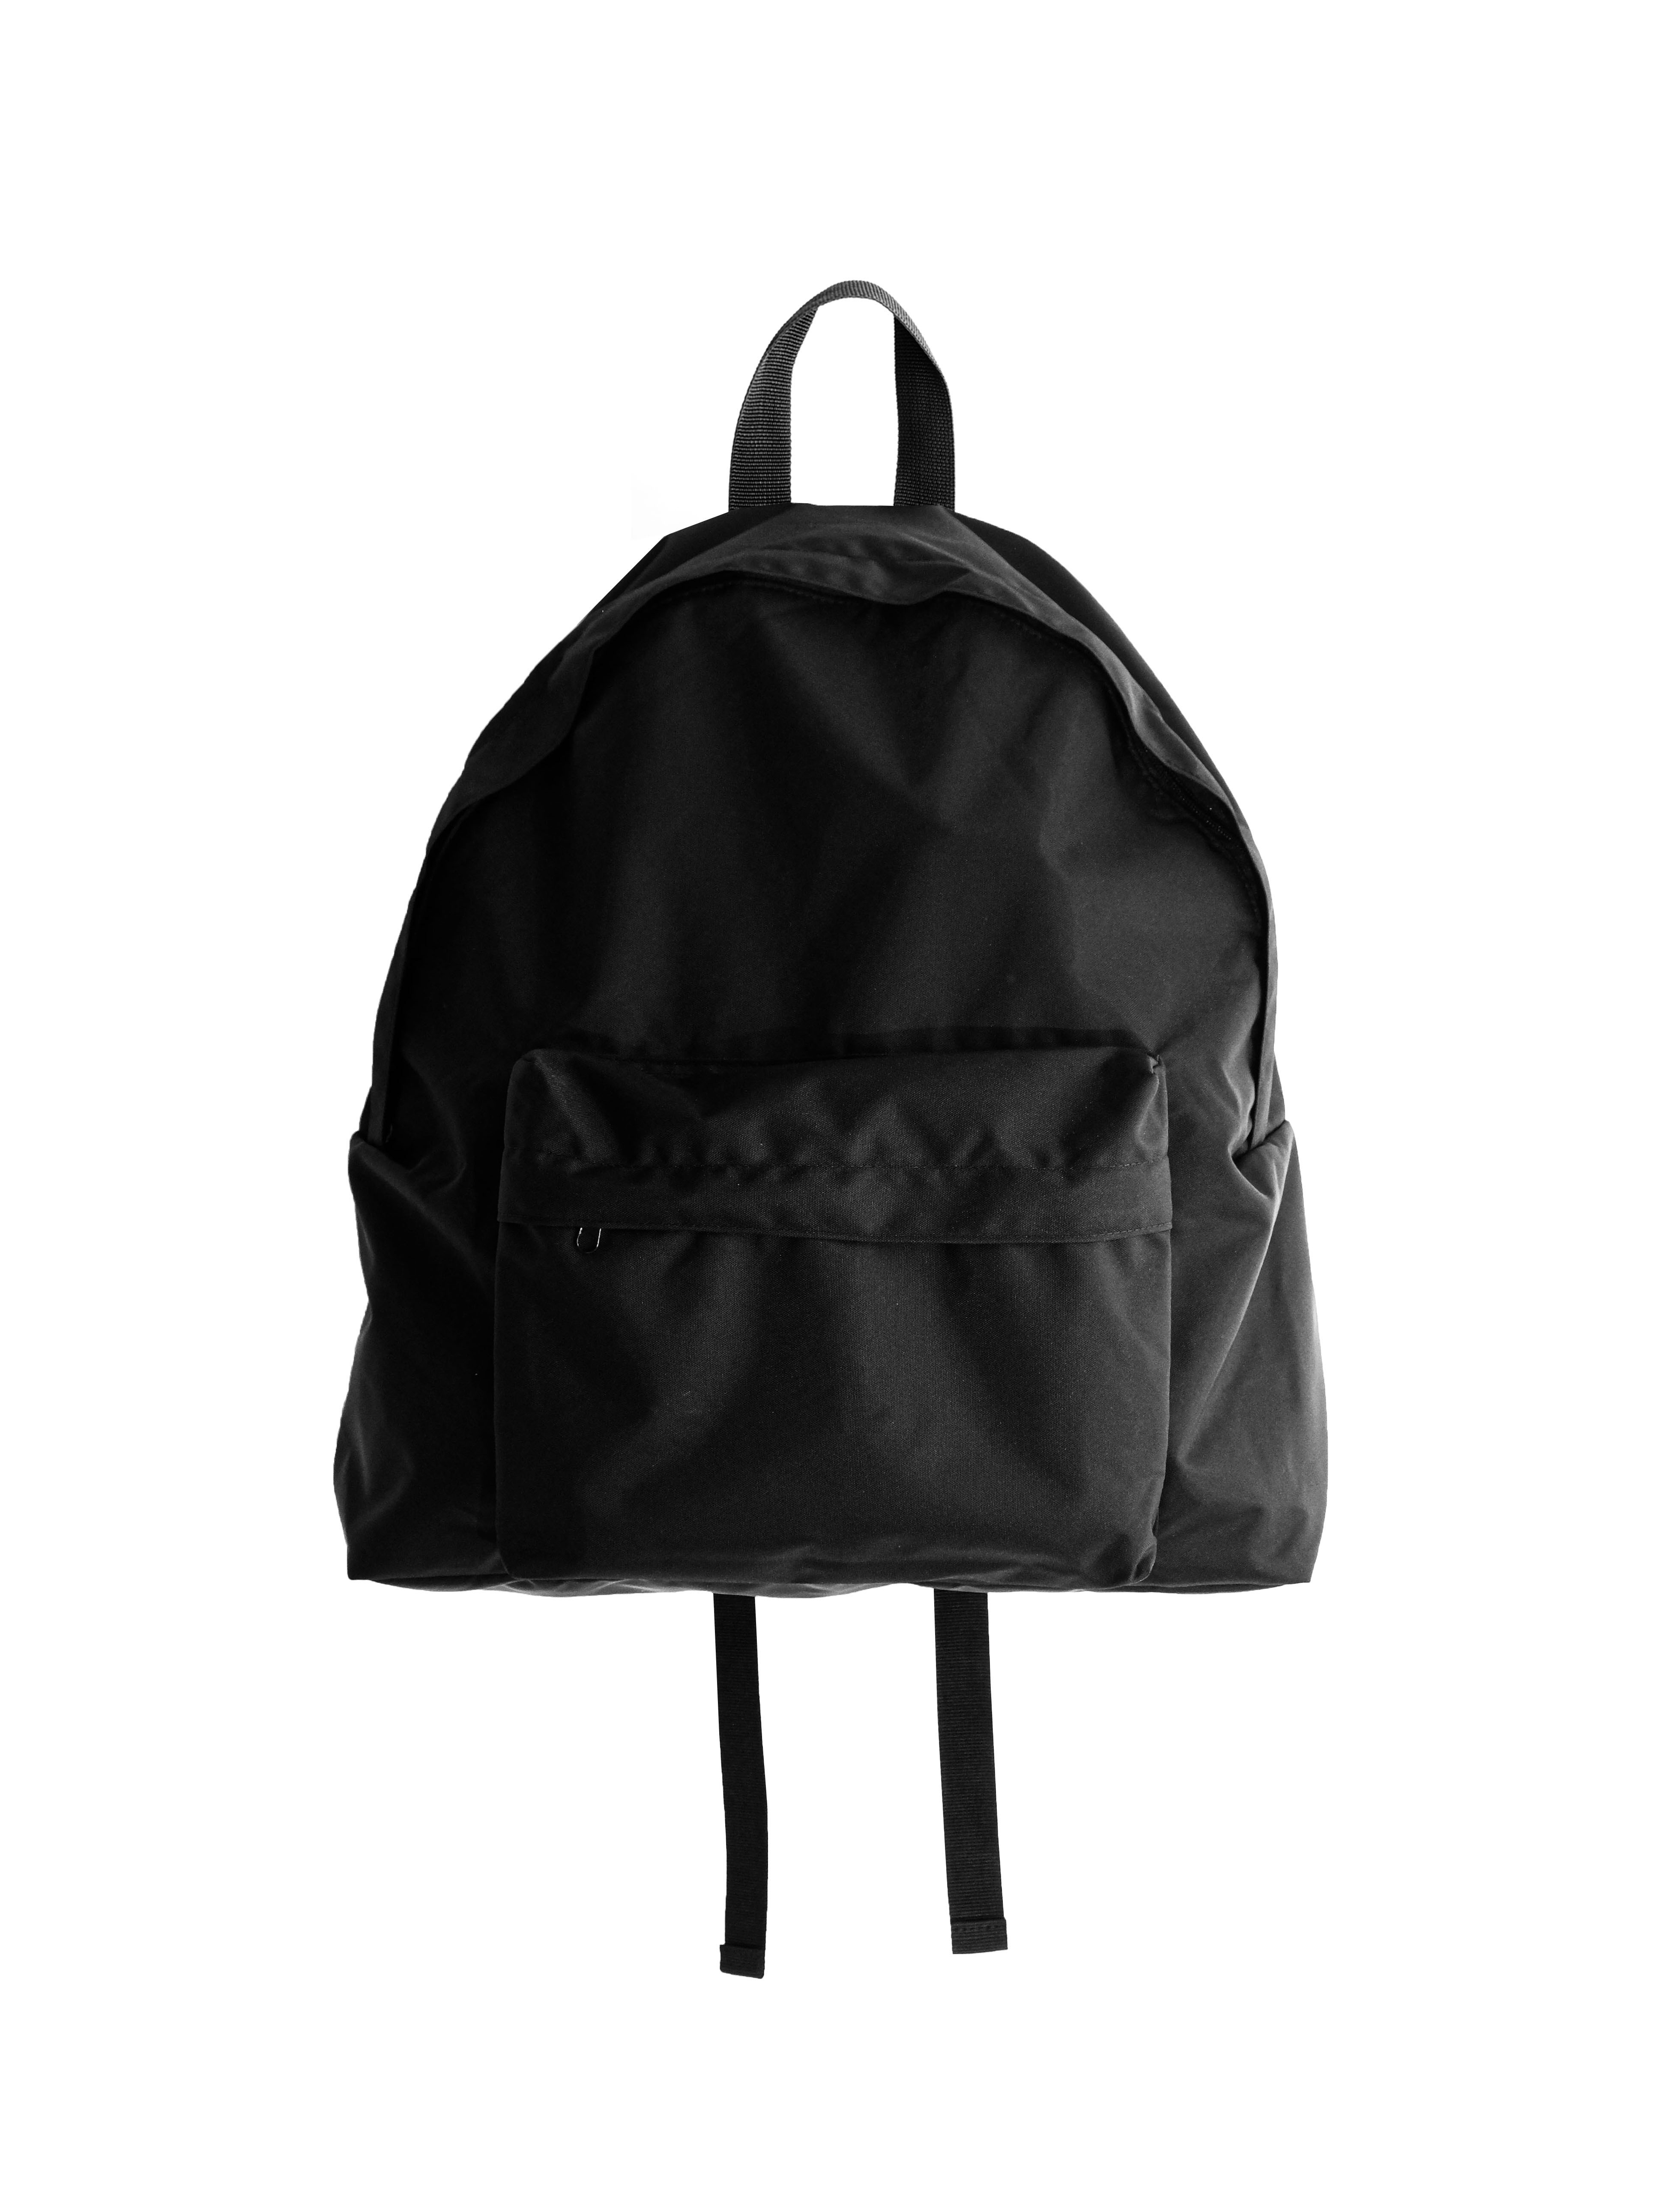 Common backpack